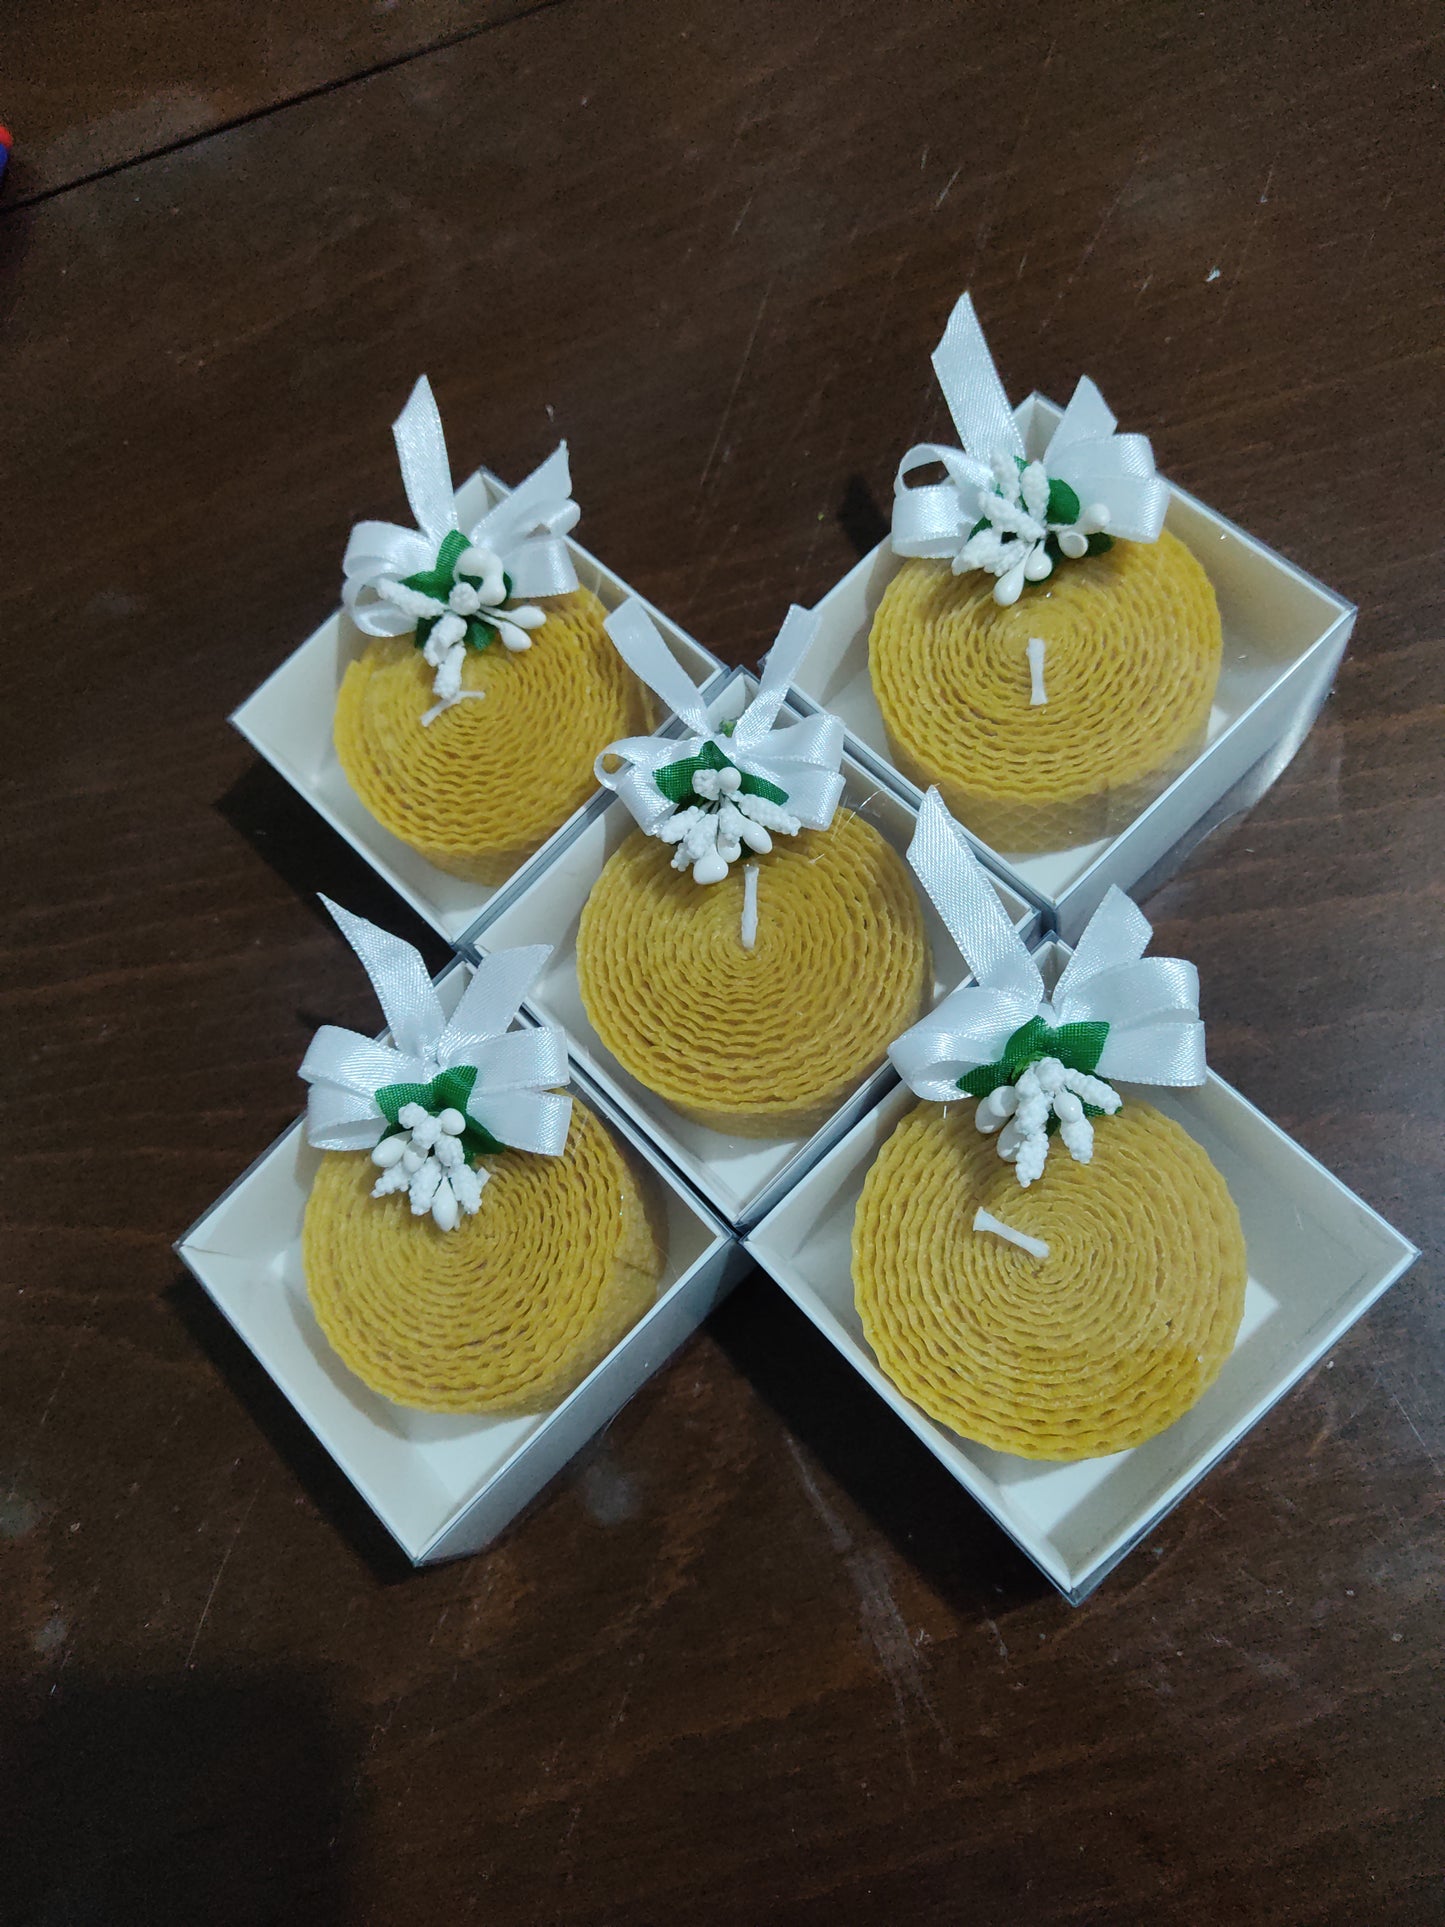 Special Wedding Favors, Unity day Favors, Bridesmaid gifts, Hand-rolled Beeswax Candles